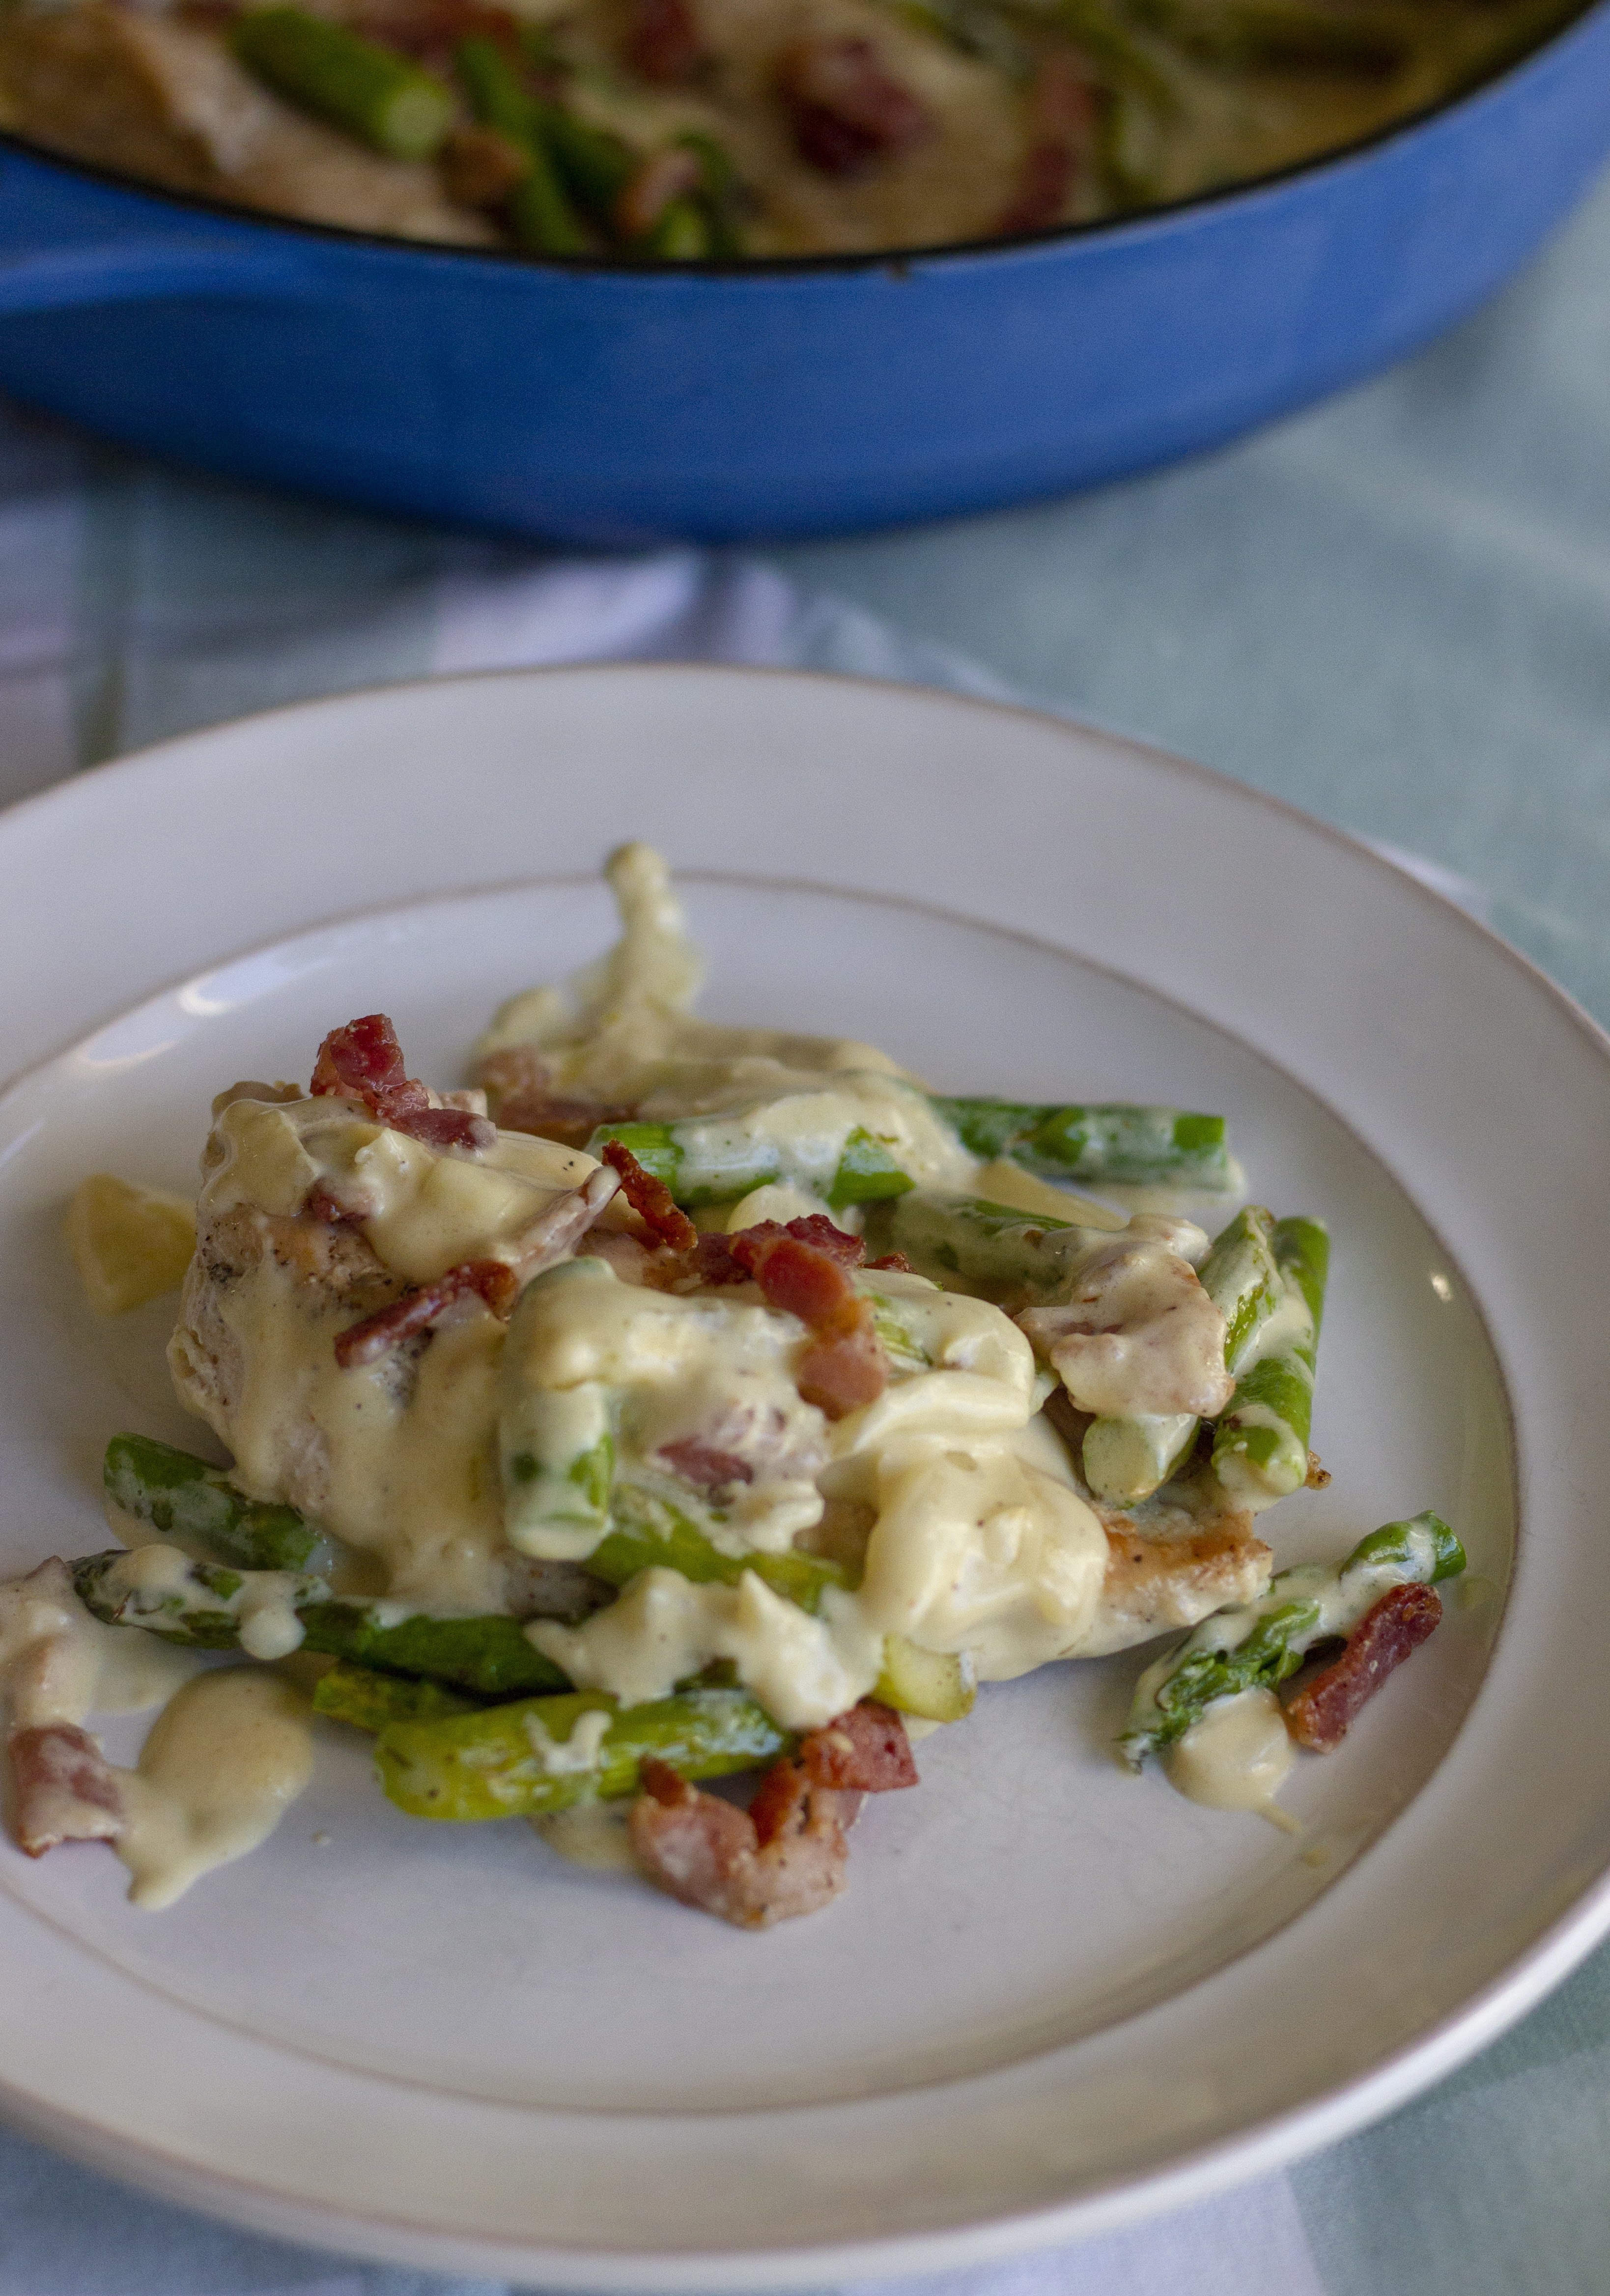 A simple keto chicken dinner ready in 30 minutes. Chicken breasts are sautÃ©ed with bacon and asparagus and topped with a robust white cheddar mornay sauce. Only 8 net carbs per serving.